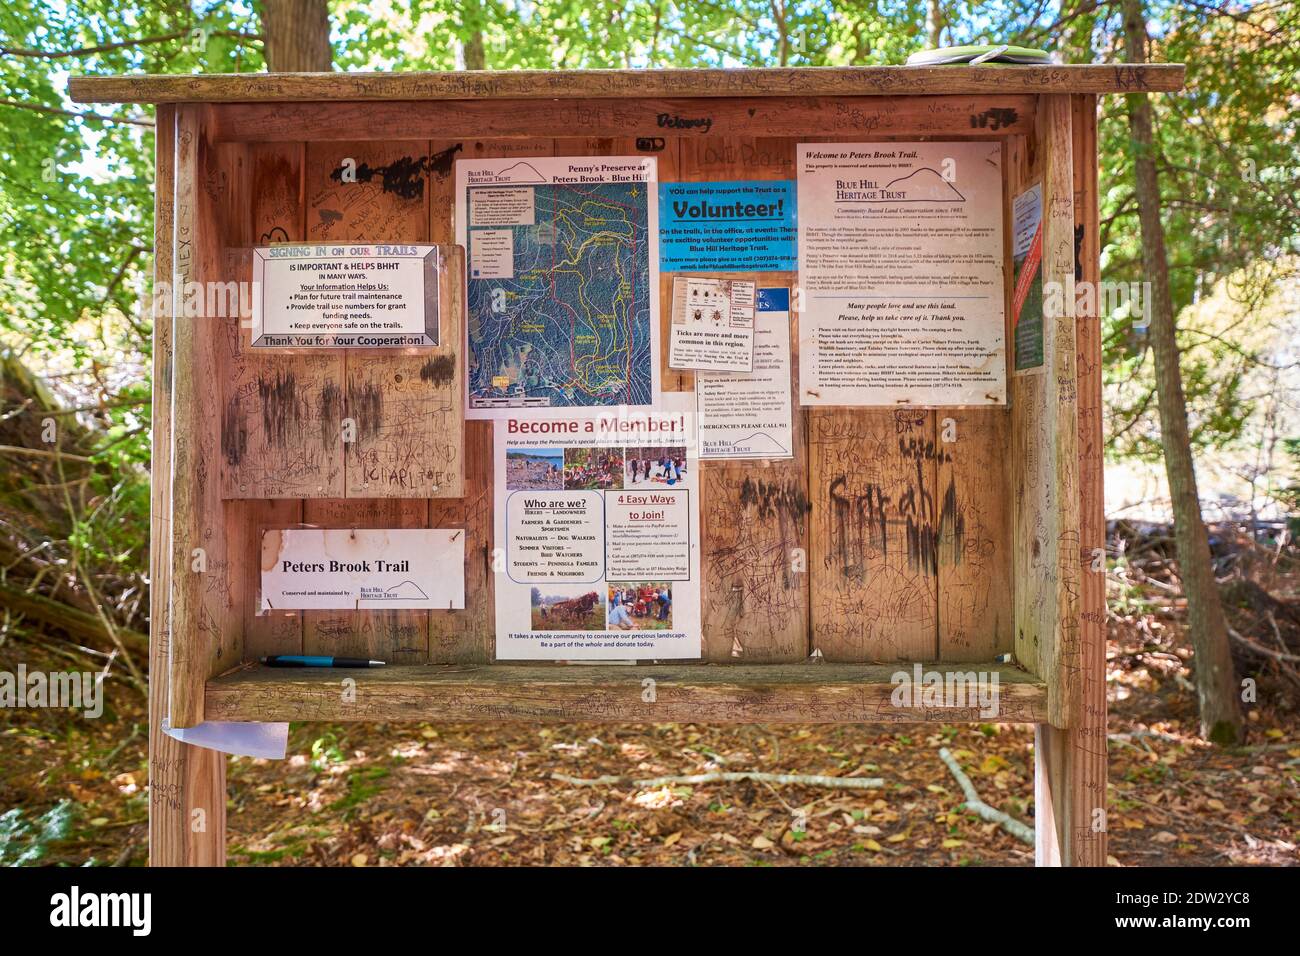 The wood bulletin board for the Peter's Brook Trail, part of the Blue Hill Heritage Trust conservation land. In East Blue Hill, Maine. Stock Photo